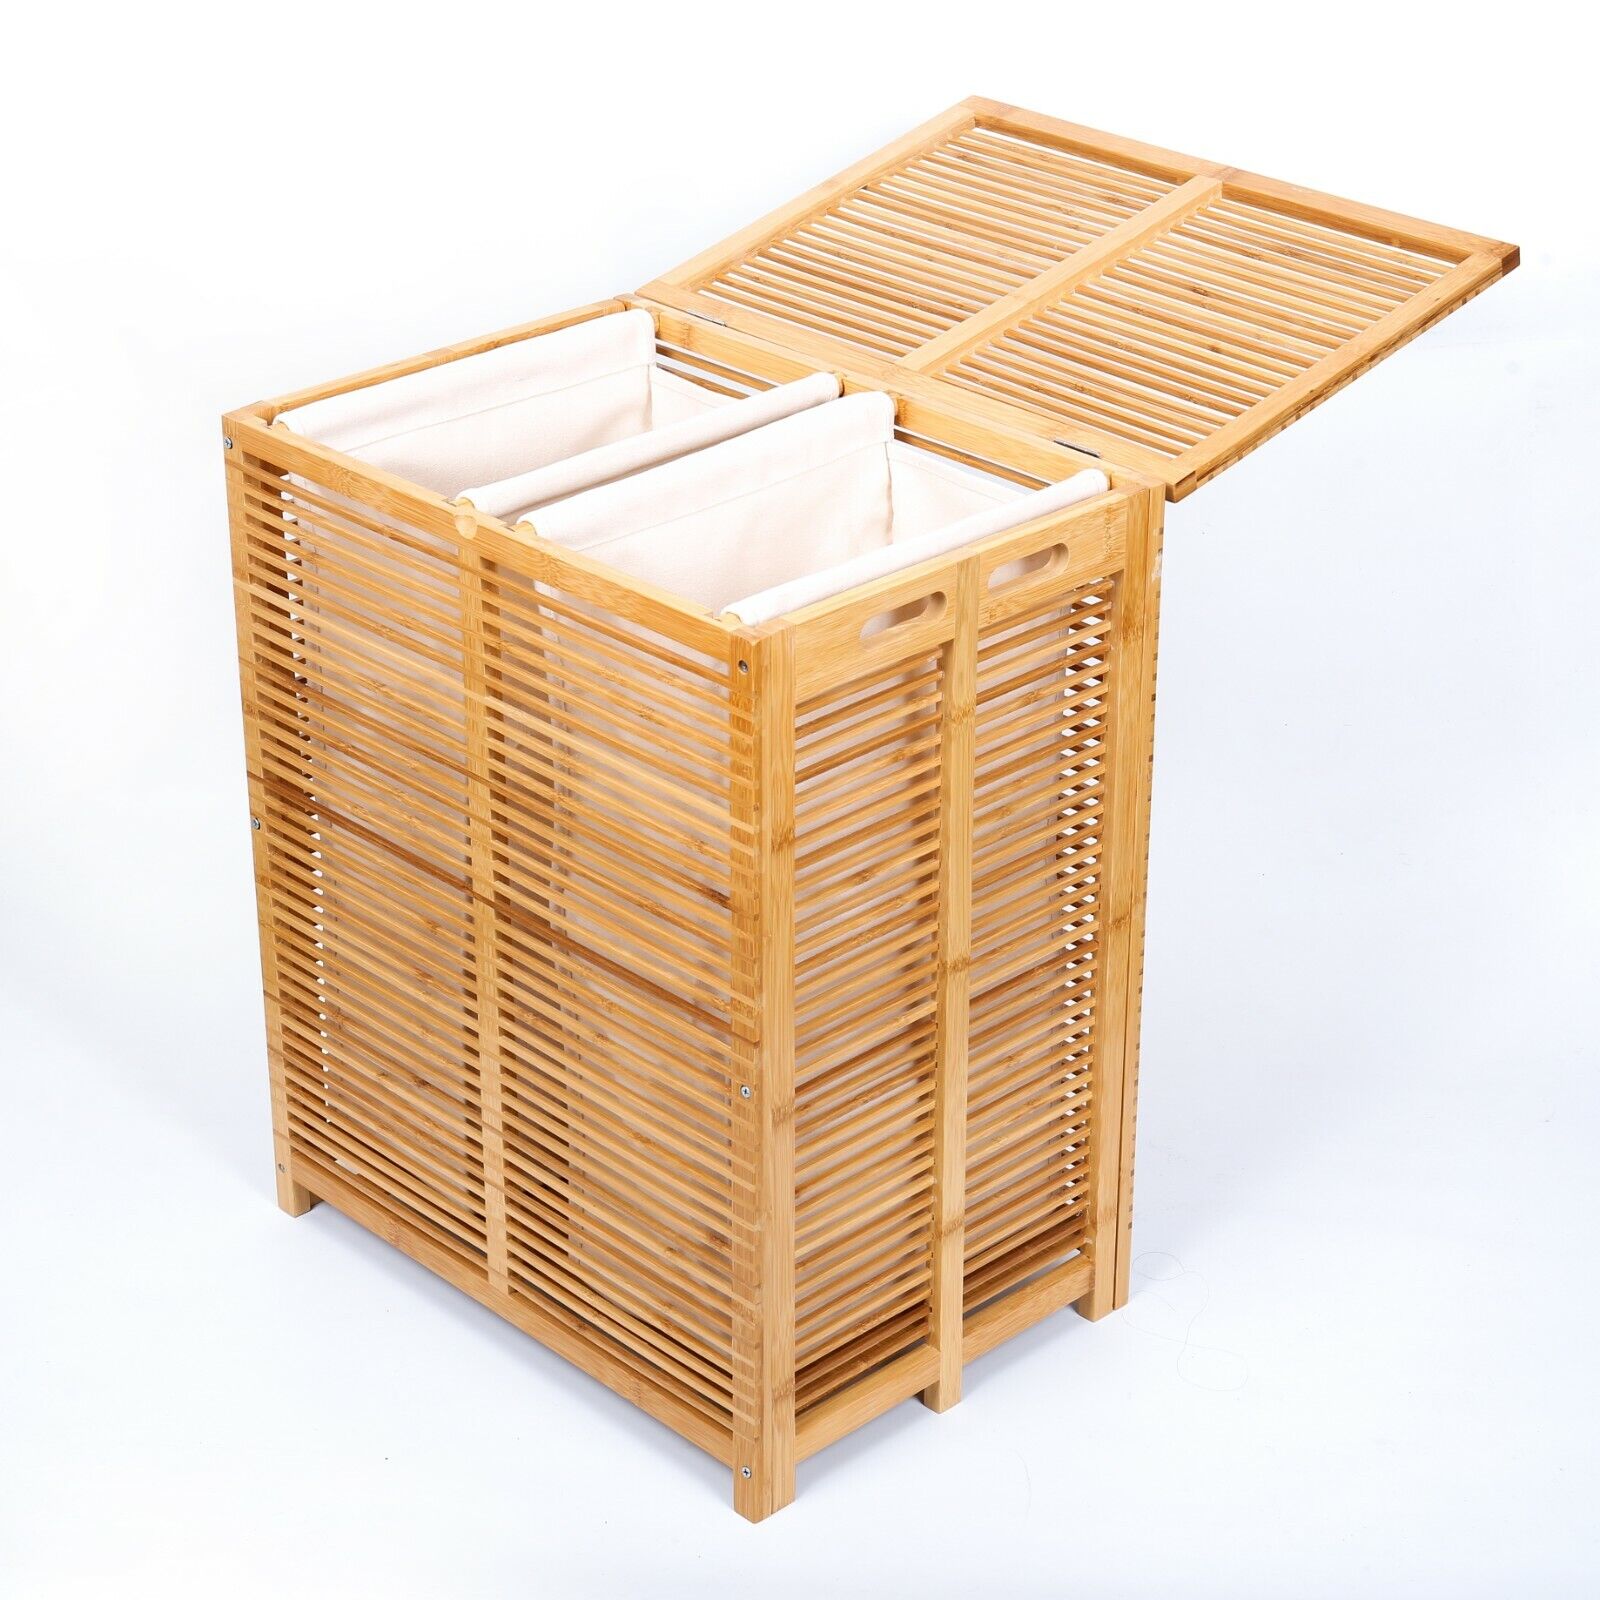 Bamboo Laundry Hamper with Lid and Removable Two Liners Dirty Clothes Bin Basket